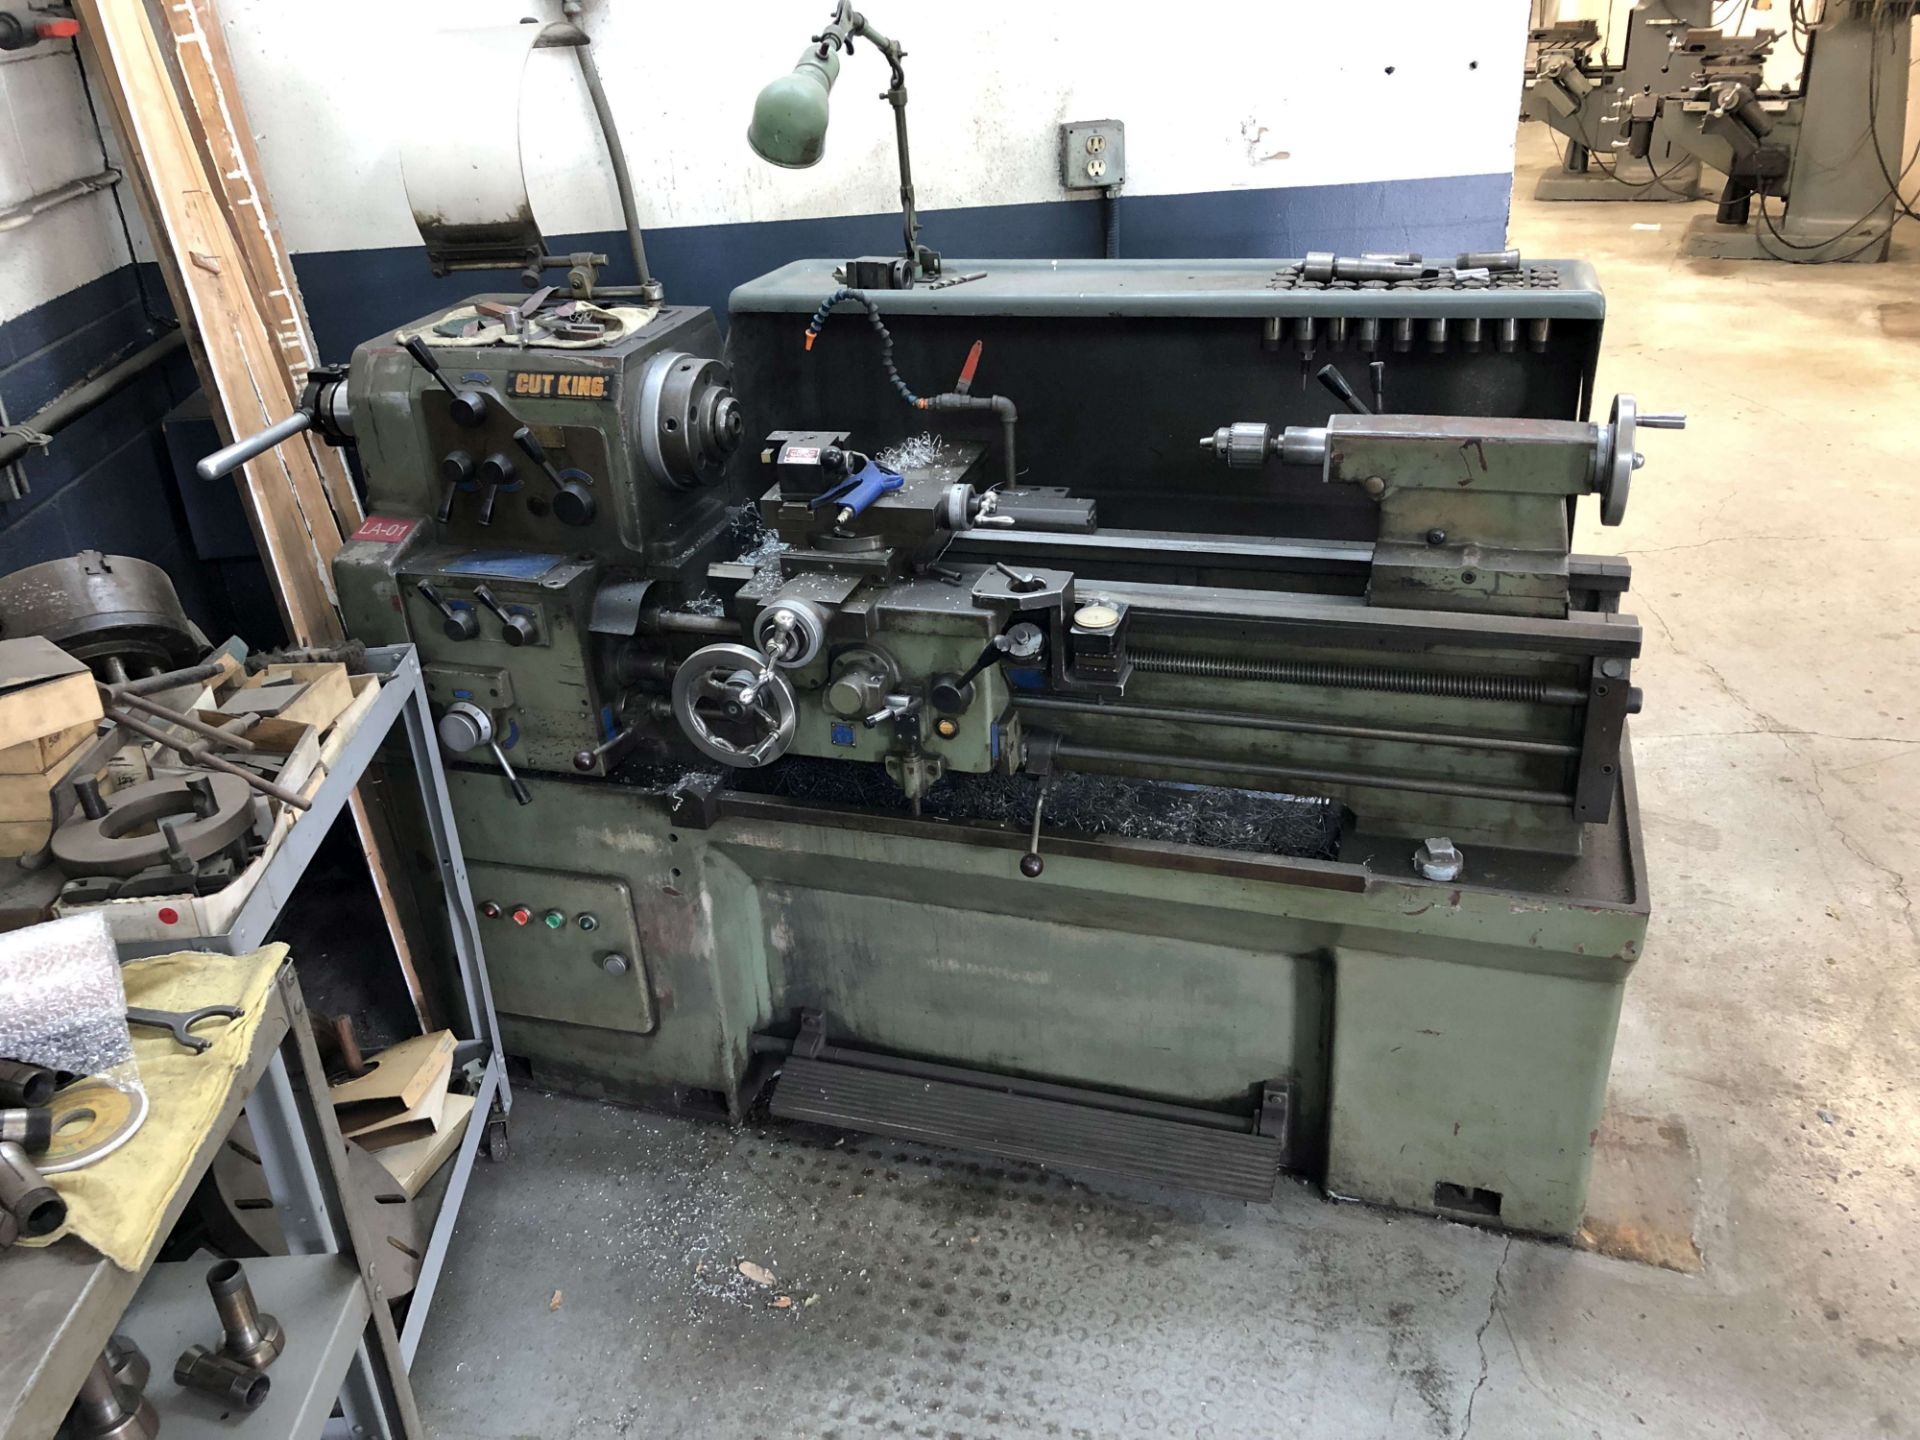 Cut King Lathe, Approx. 16" Swing x 30" Between Centers, 83 to 1800 RPM, Tailstock, Tool Post, w/